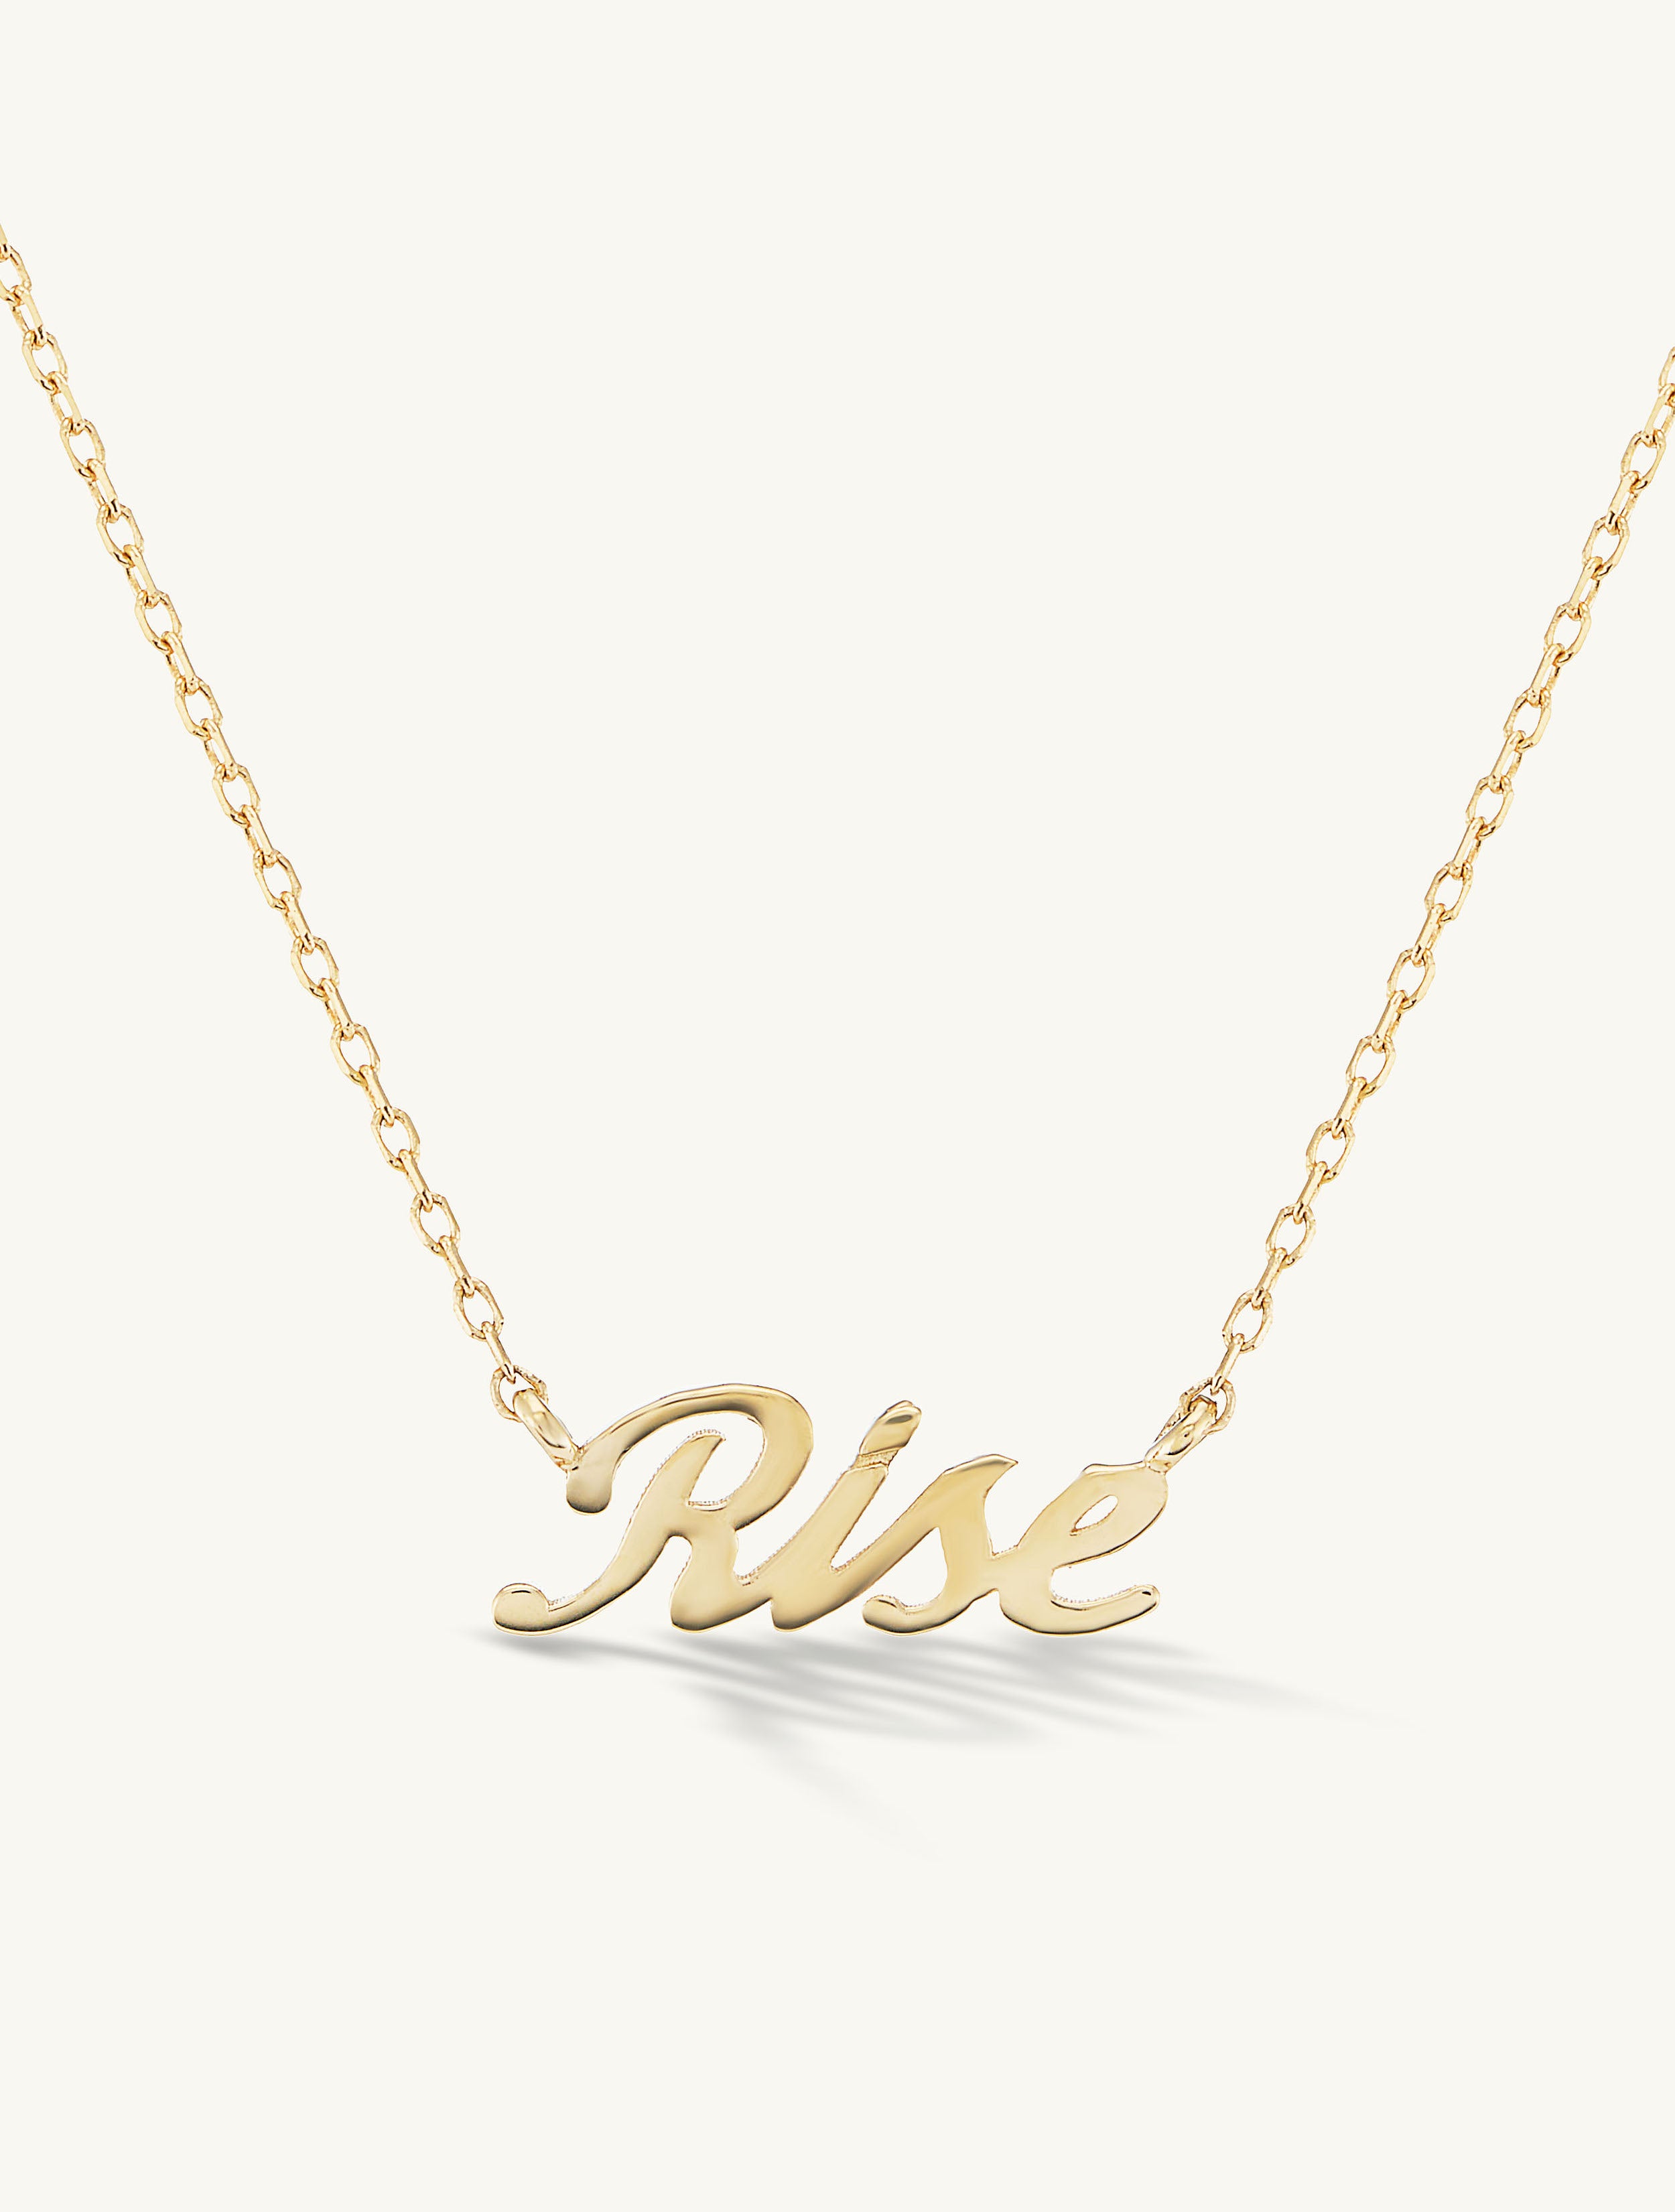 Rise Gold Necklace